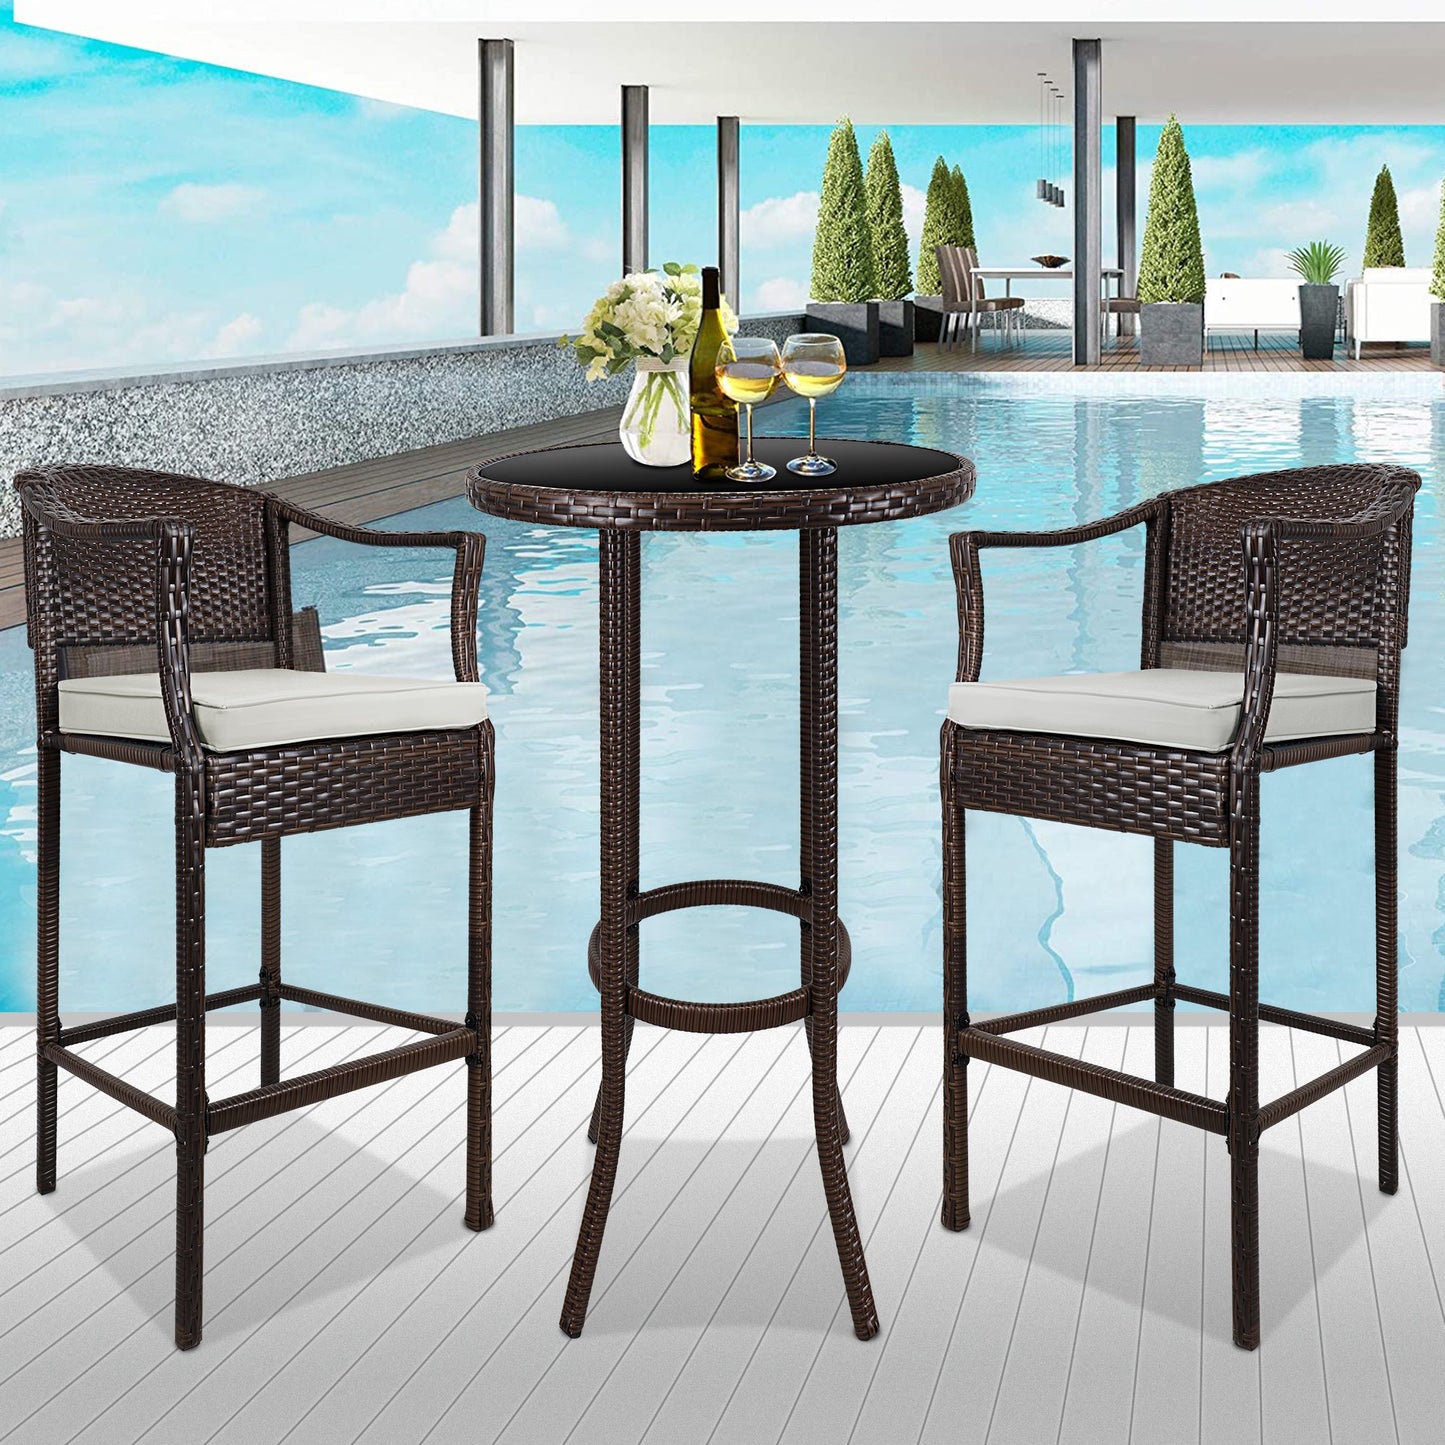 Patio Swivel Bistro Set, 3 Piece Outdoor Bar Table and Stools Set, 2 Patio Swivel Bar Chairs with 1 High Glass Top Table, All Weather Metal Frame Furniture Set for Garden Yard Balcony Pool Cafe, K06